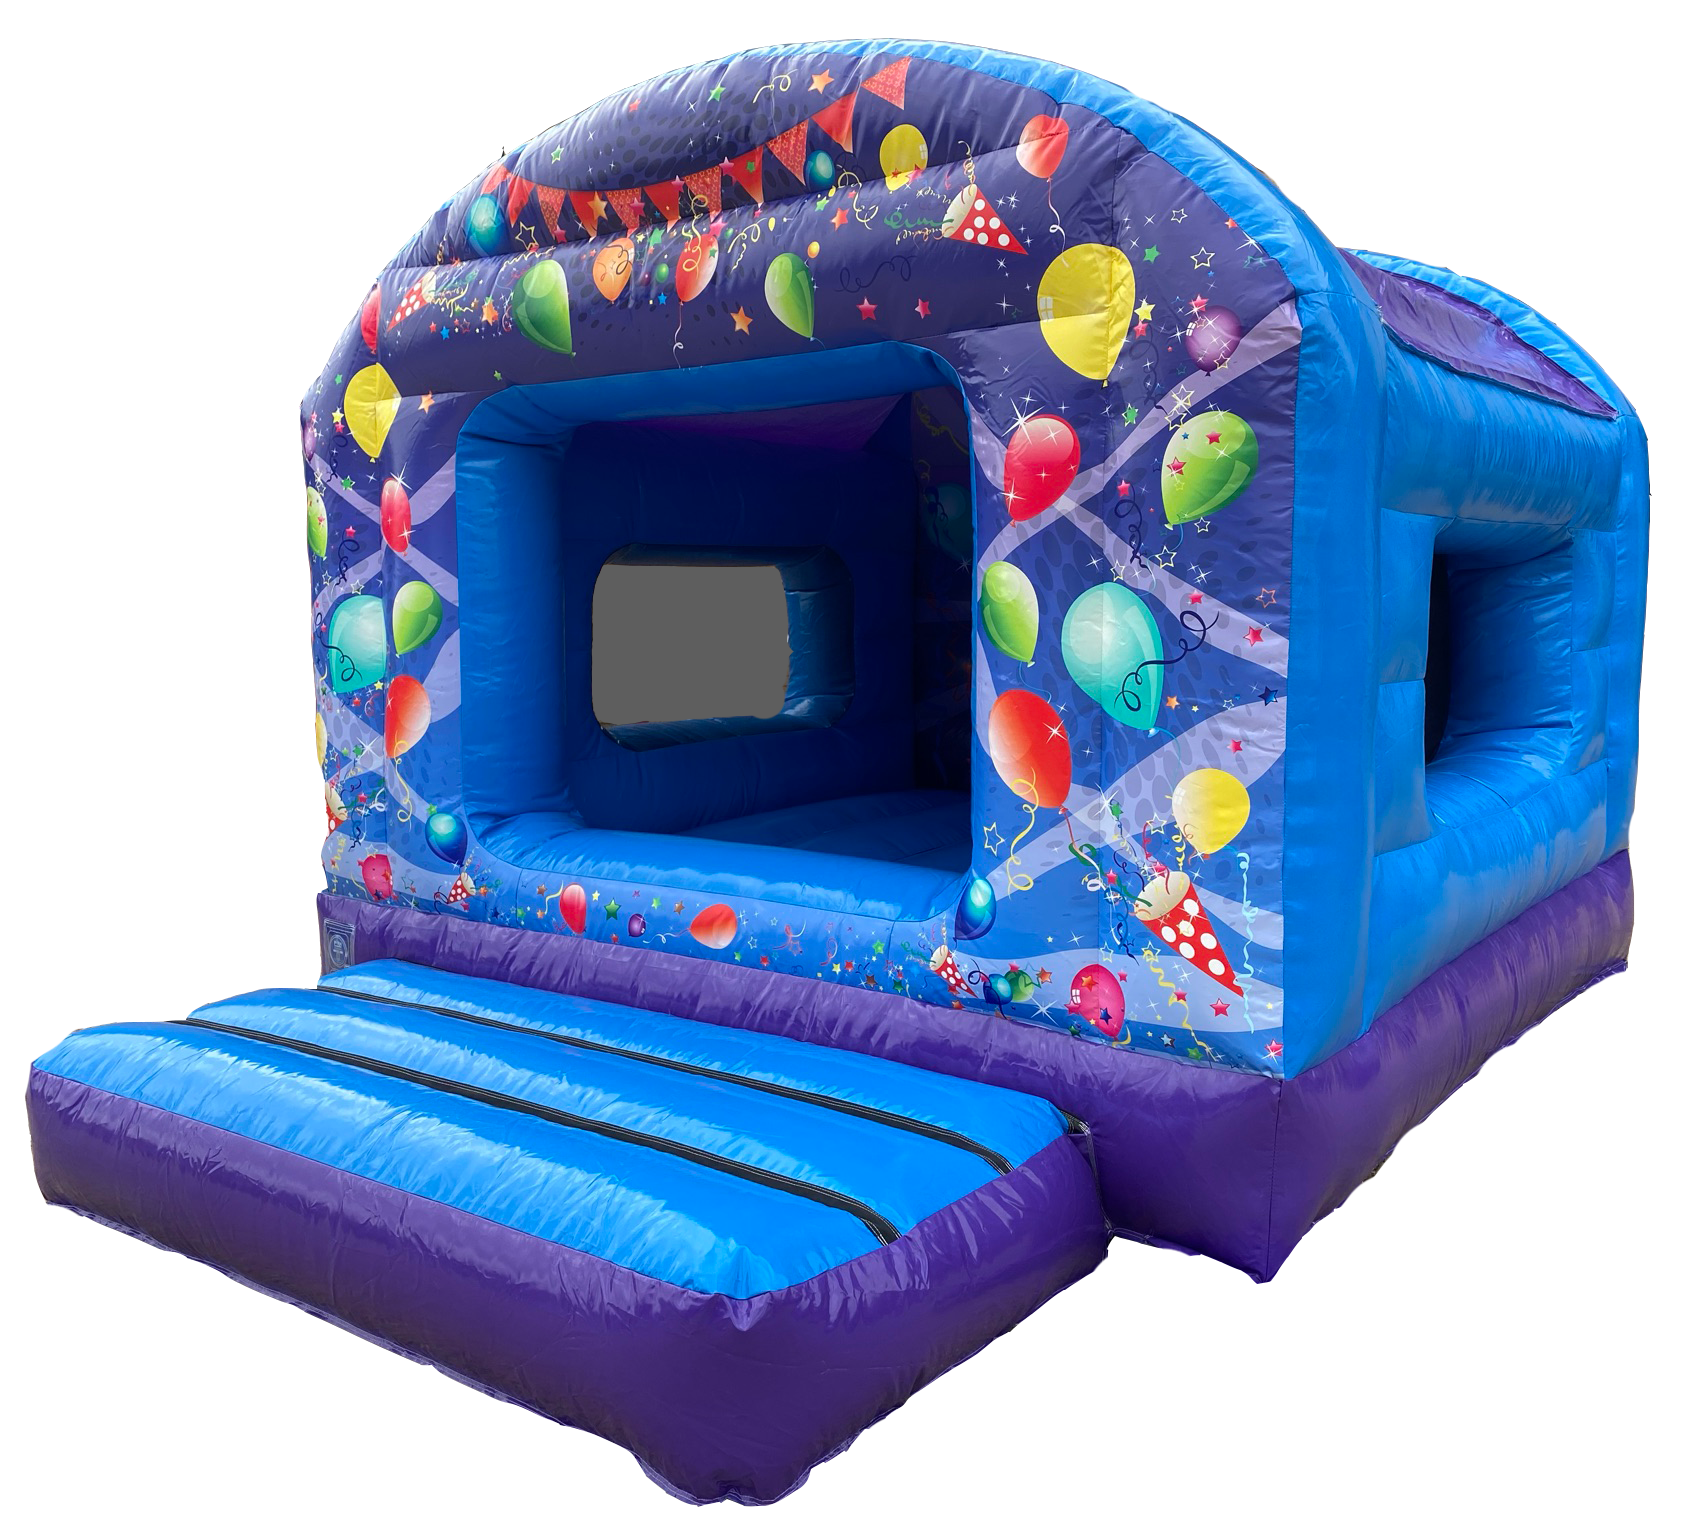 10ft Bouncy castle in green pink and purple with dance party themed artwork.